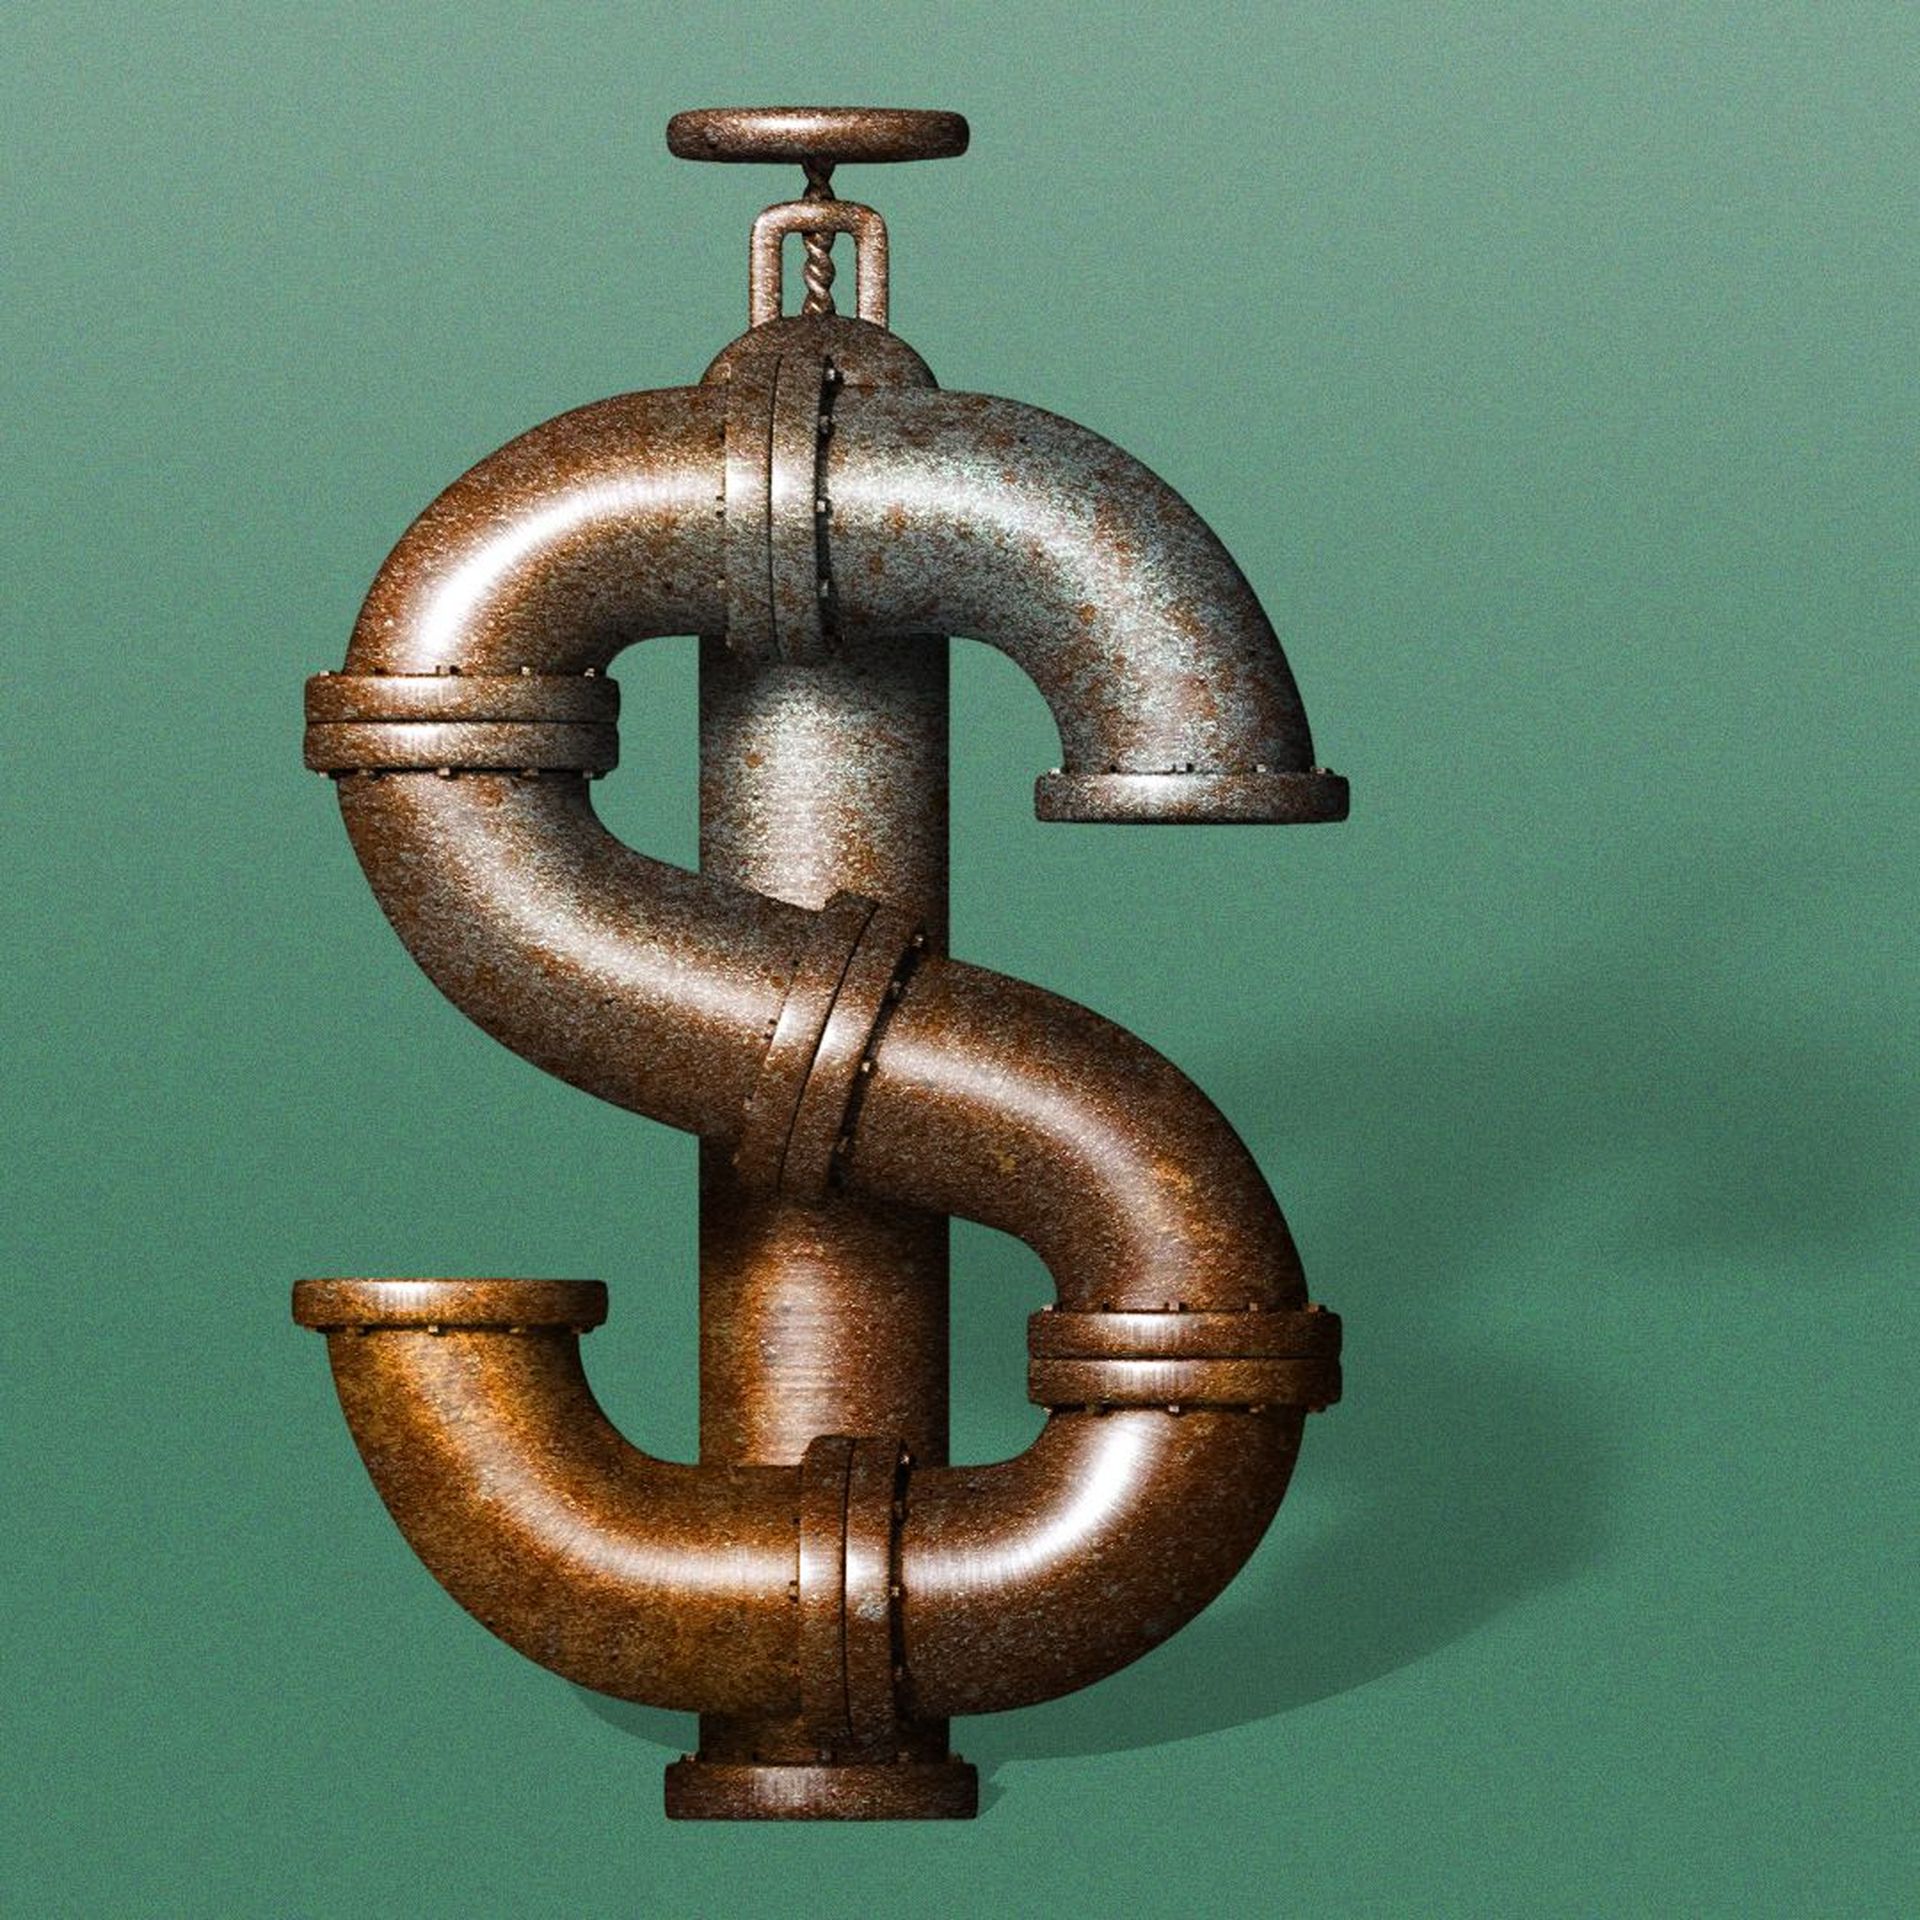 Illustration of pipes shaped like a dollar sign.